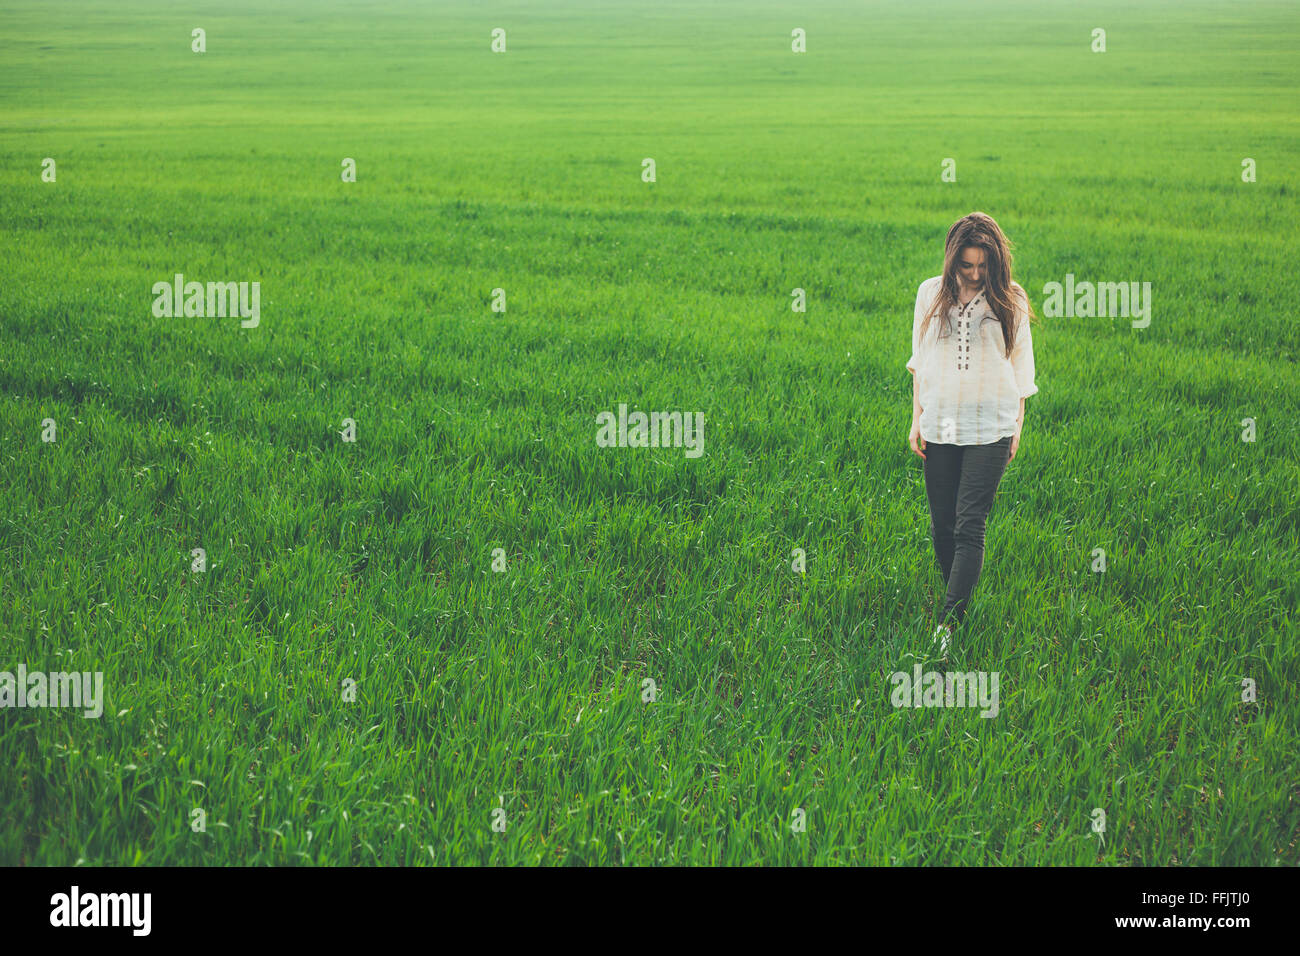 Sad lonely girl in green field Stock Photo